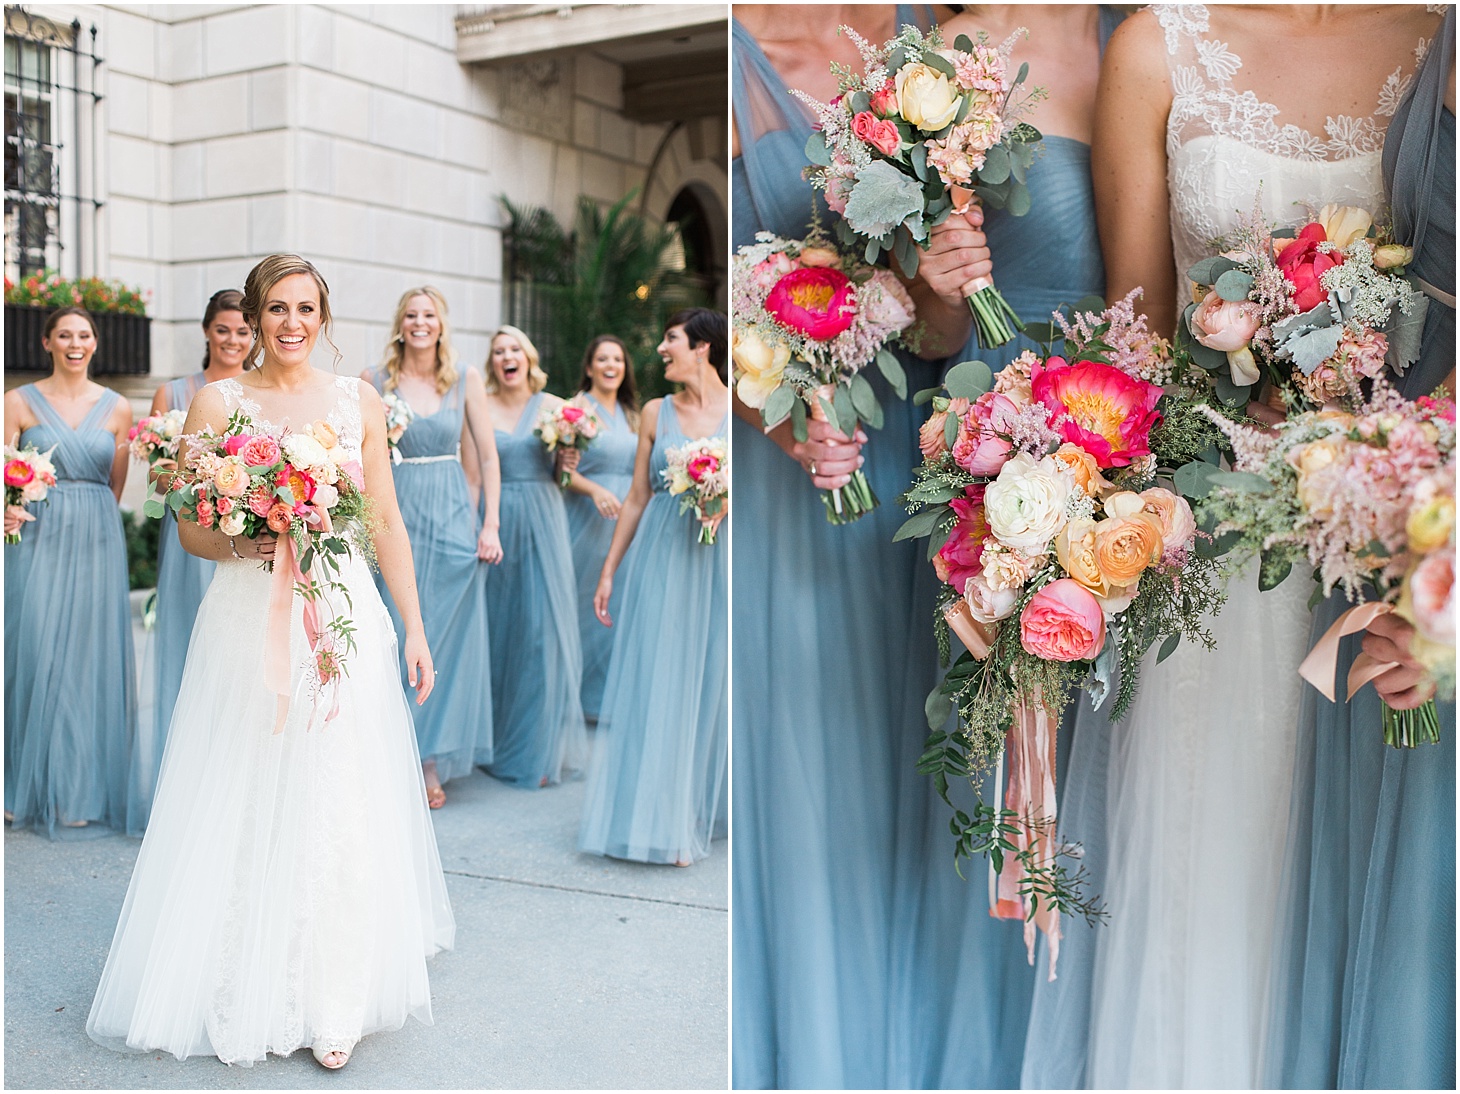 Lace and Tule Amsale Wedding Gown, Dusty Blue Jenny Yoo Bridesmaid's Dresses and Holly Chappel Florals | Interfaith DC Wedding by Sarah Bradshaw Photography